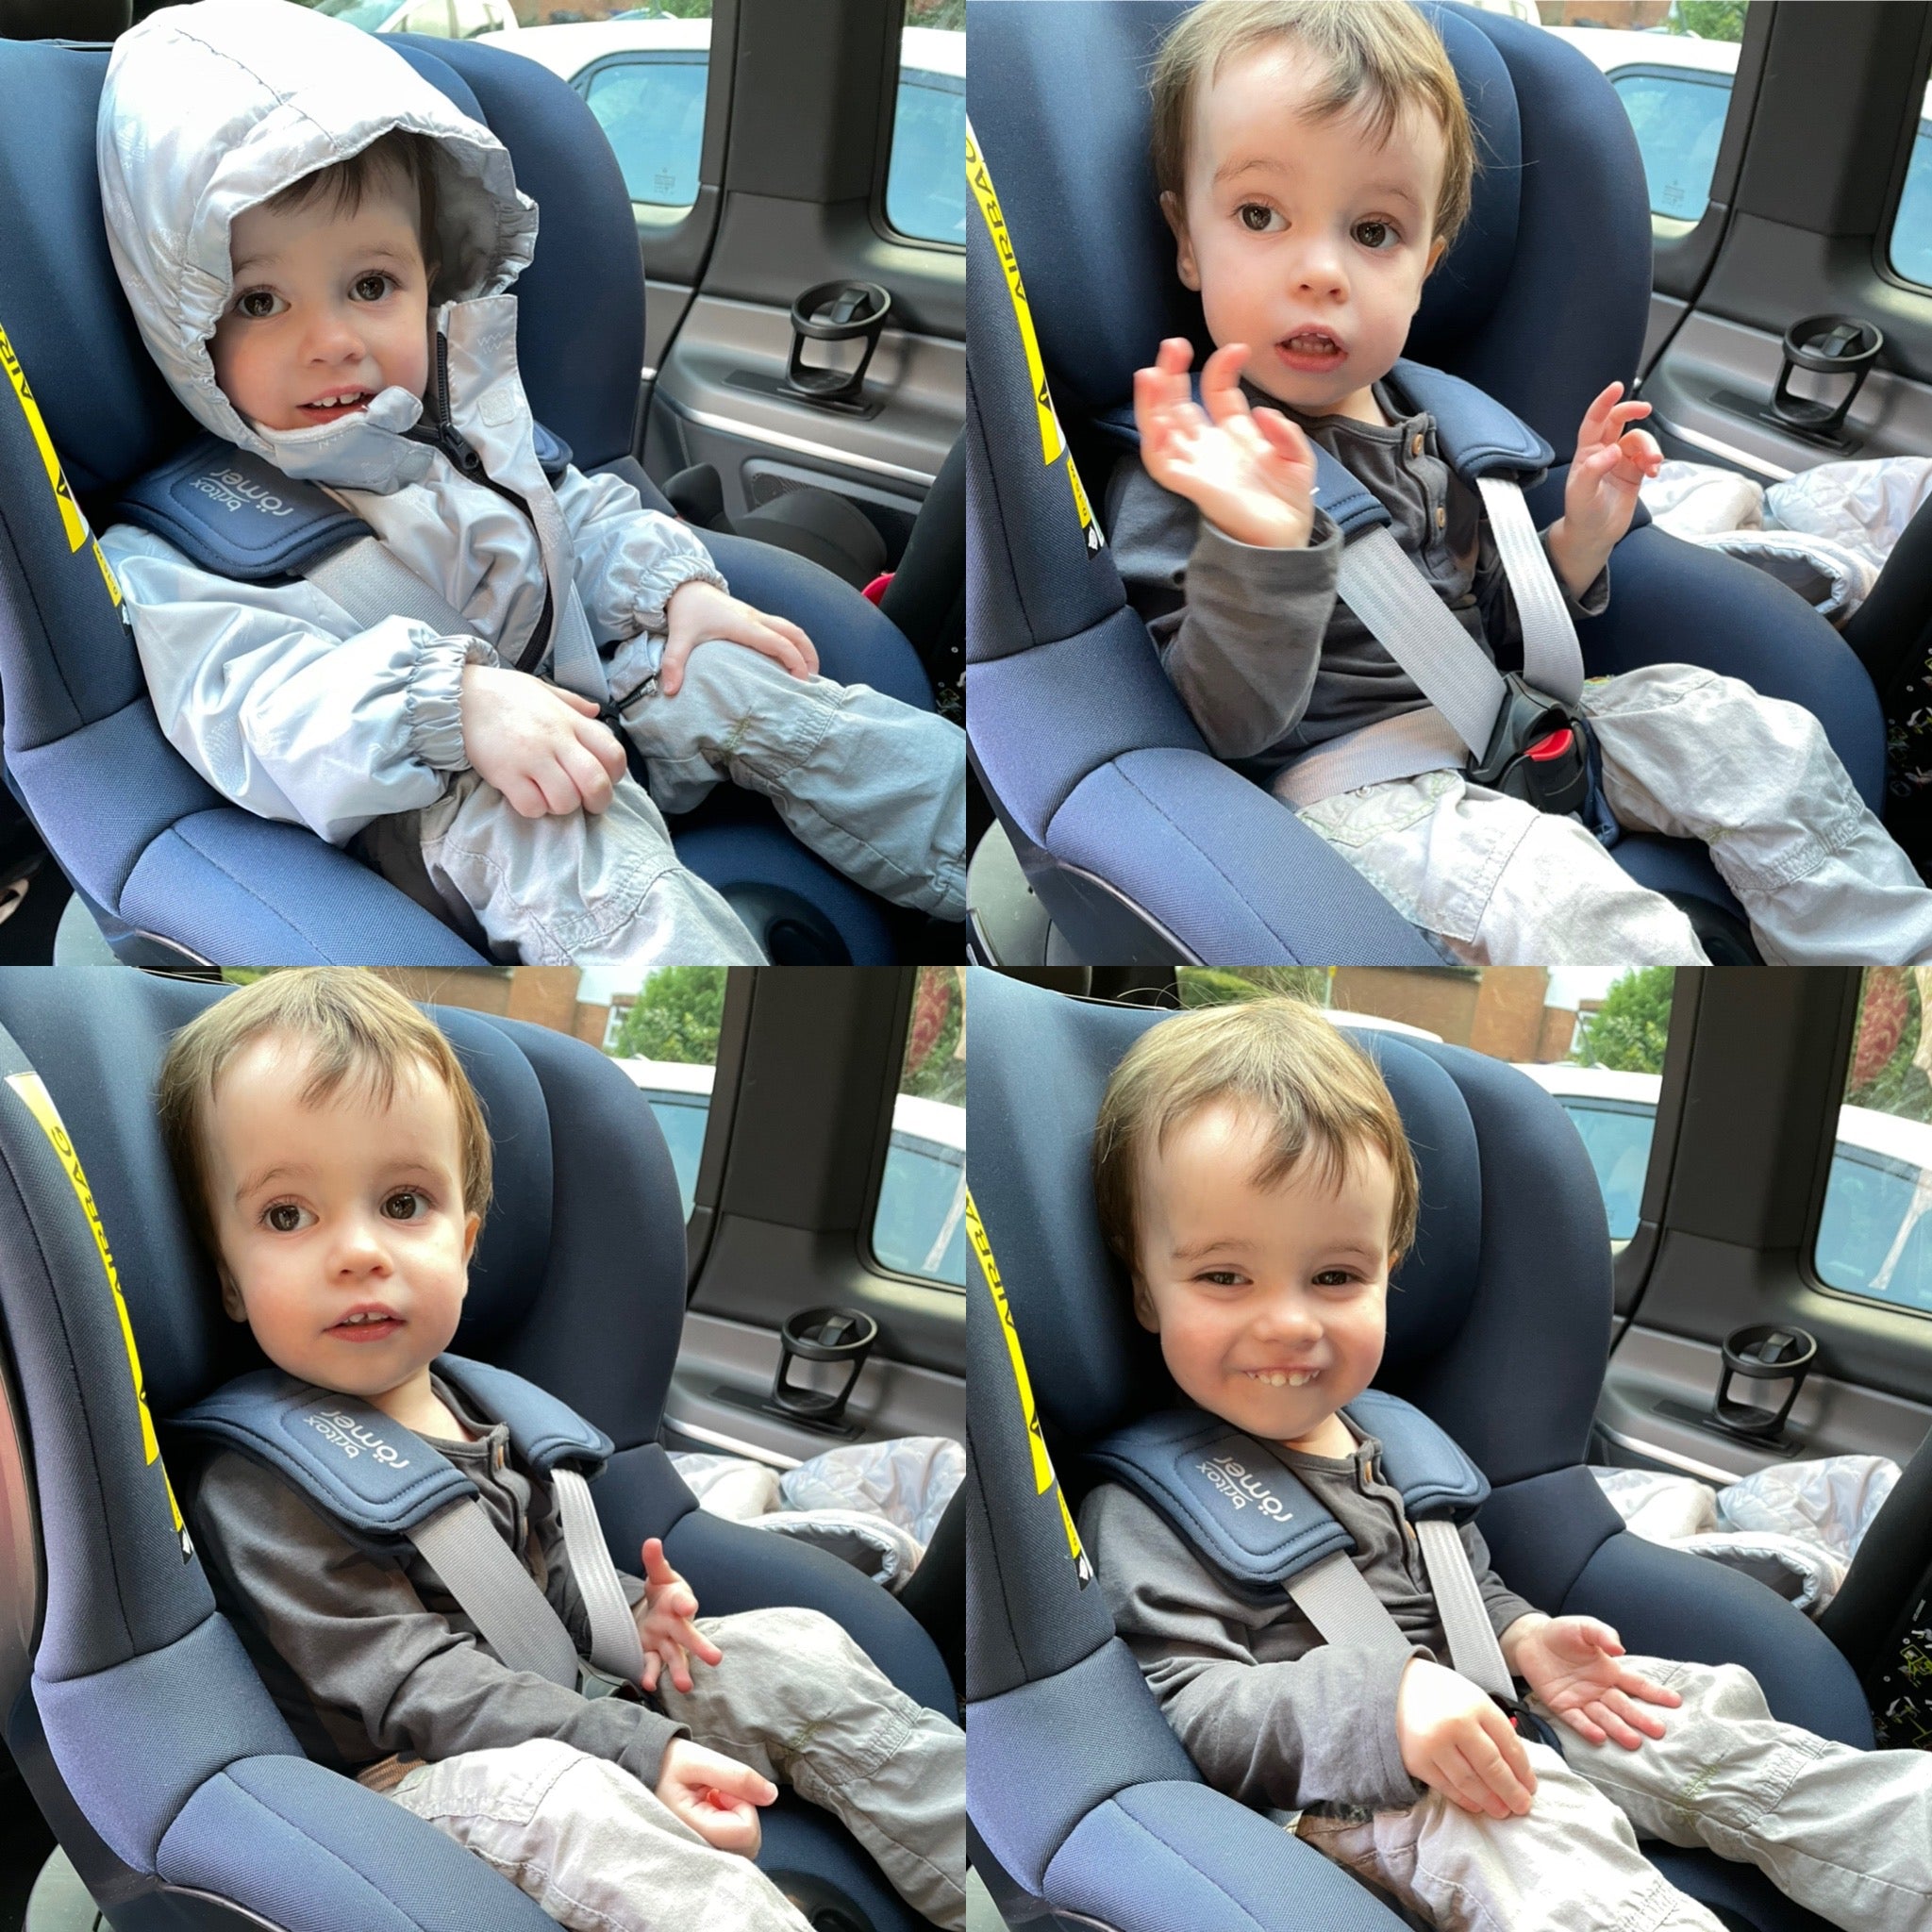 Winter jackets in car seats – Learn why you should remove them